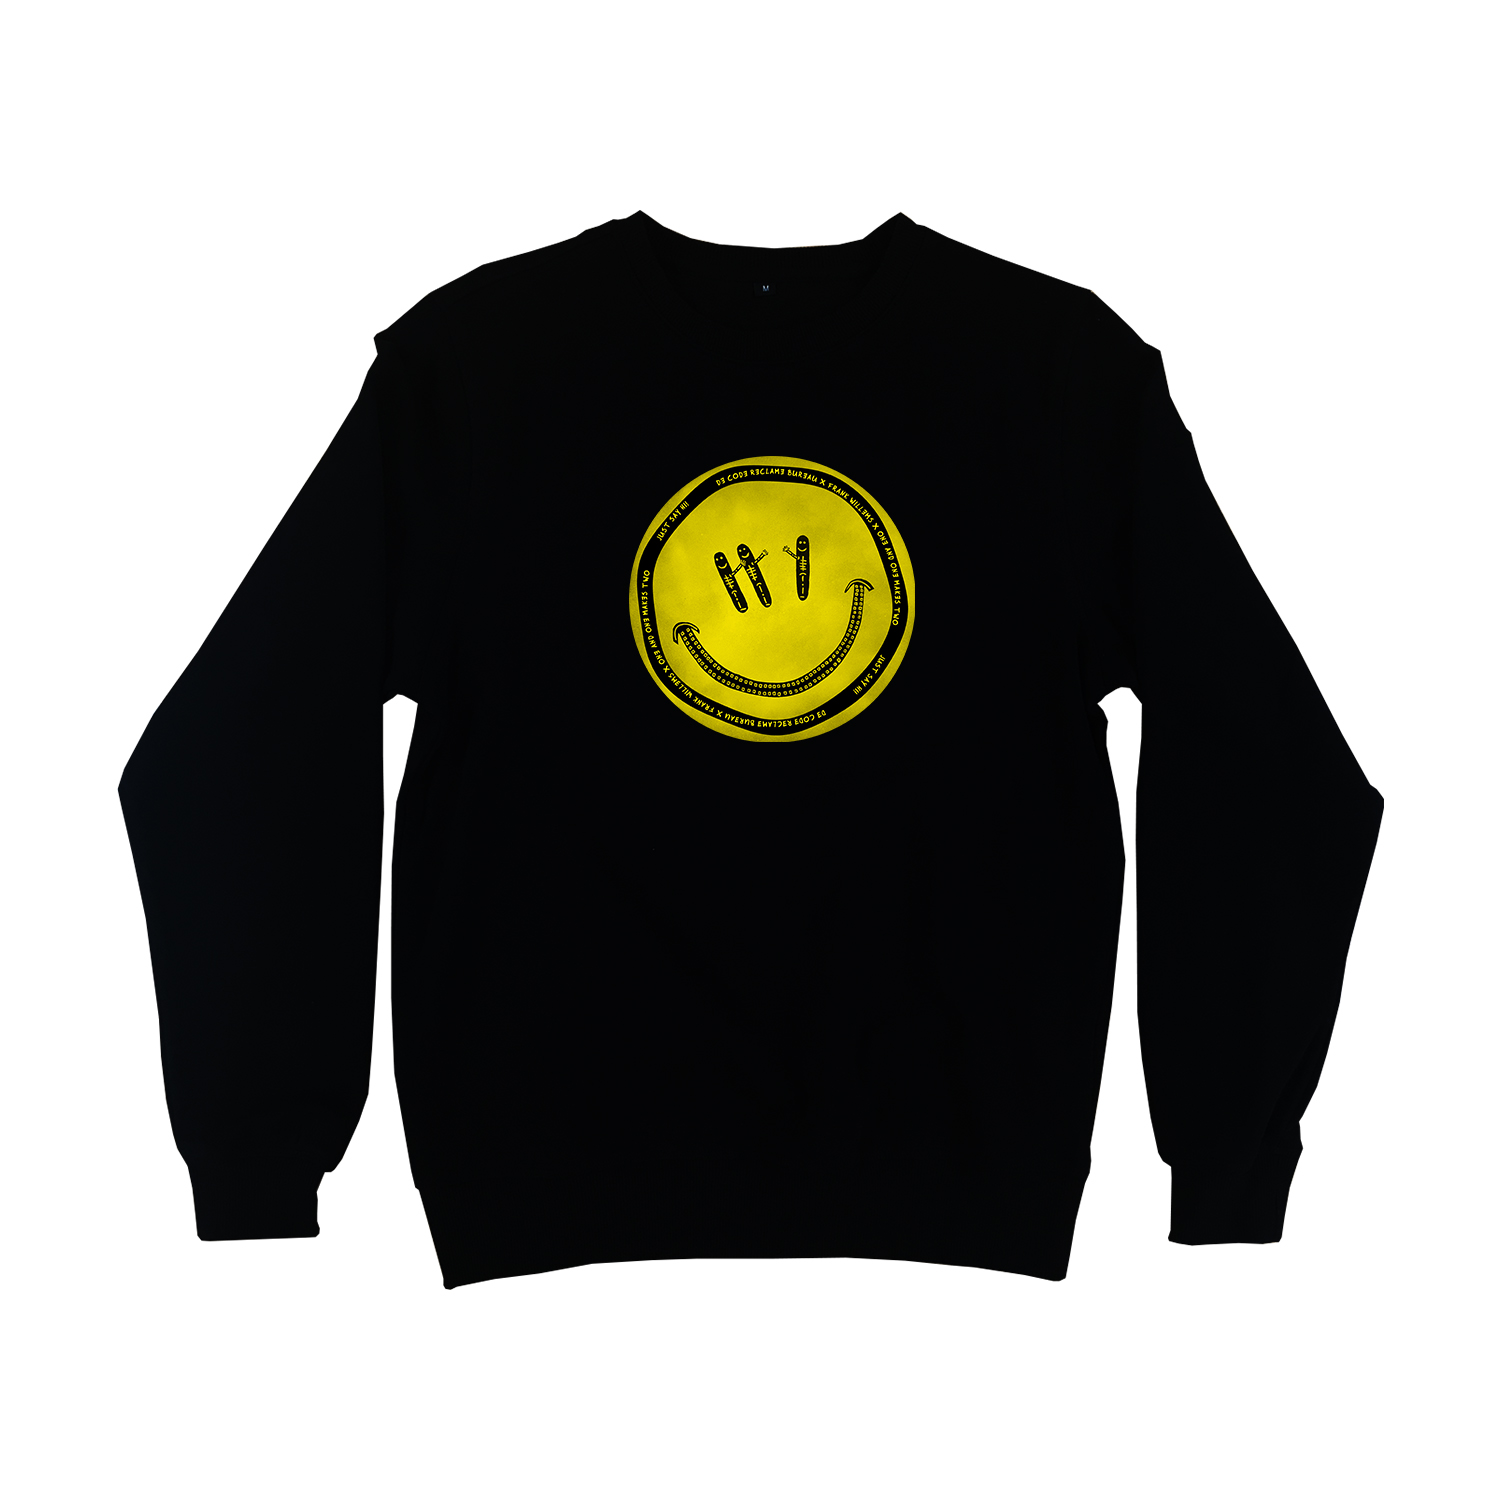 Sweater - zwart - voor - JUST SAY HI! by De Code x Frank Willems - ONE AND ONE MAKES TWO